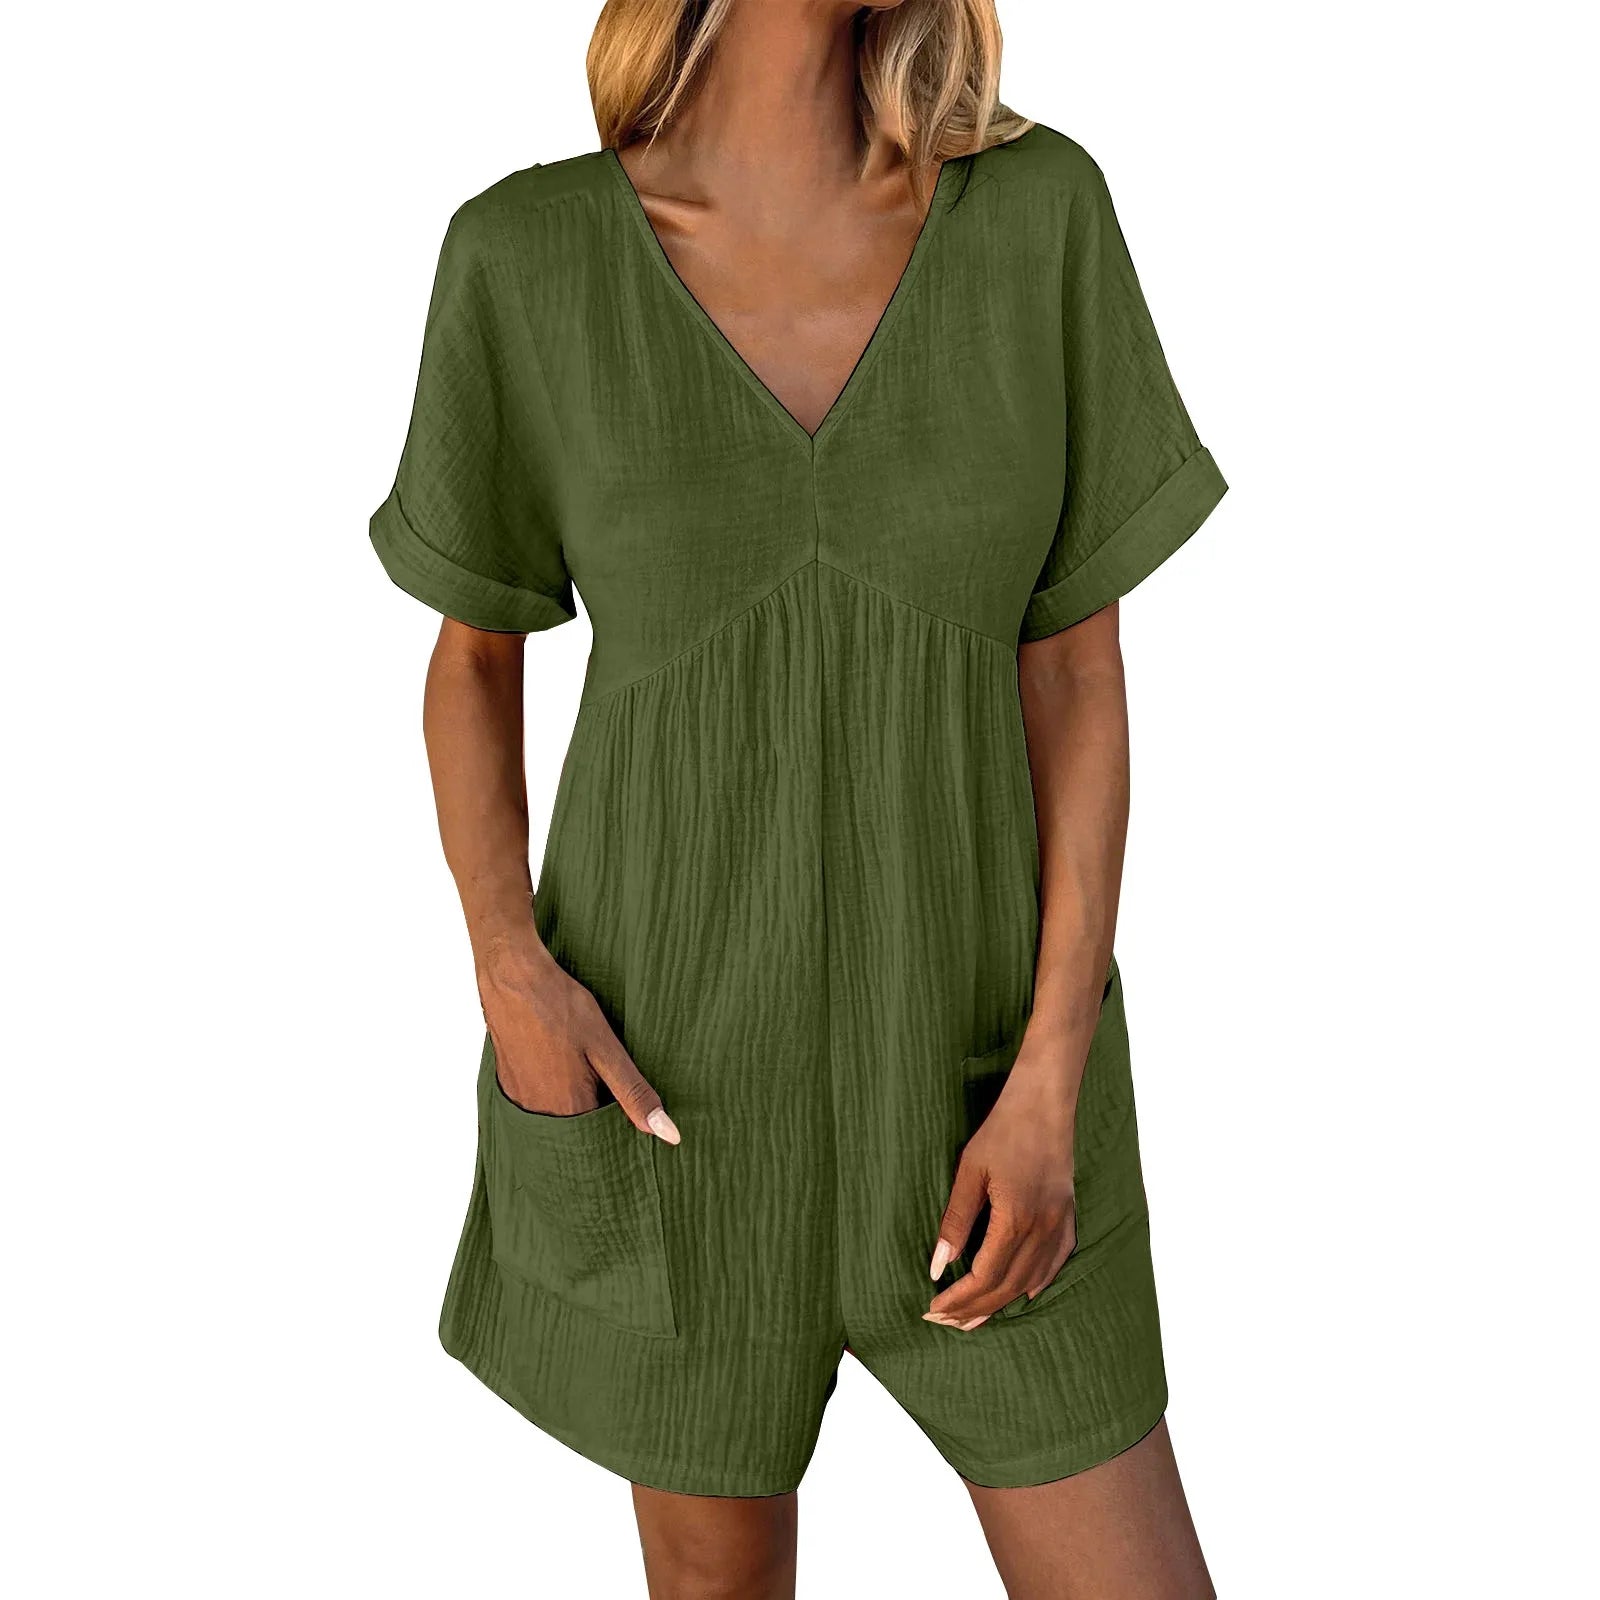 Rompers- Essential Summer Romper with Textured Fabric and Pockets- - Pekosa Women Fashion